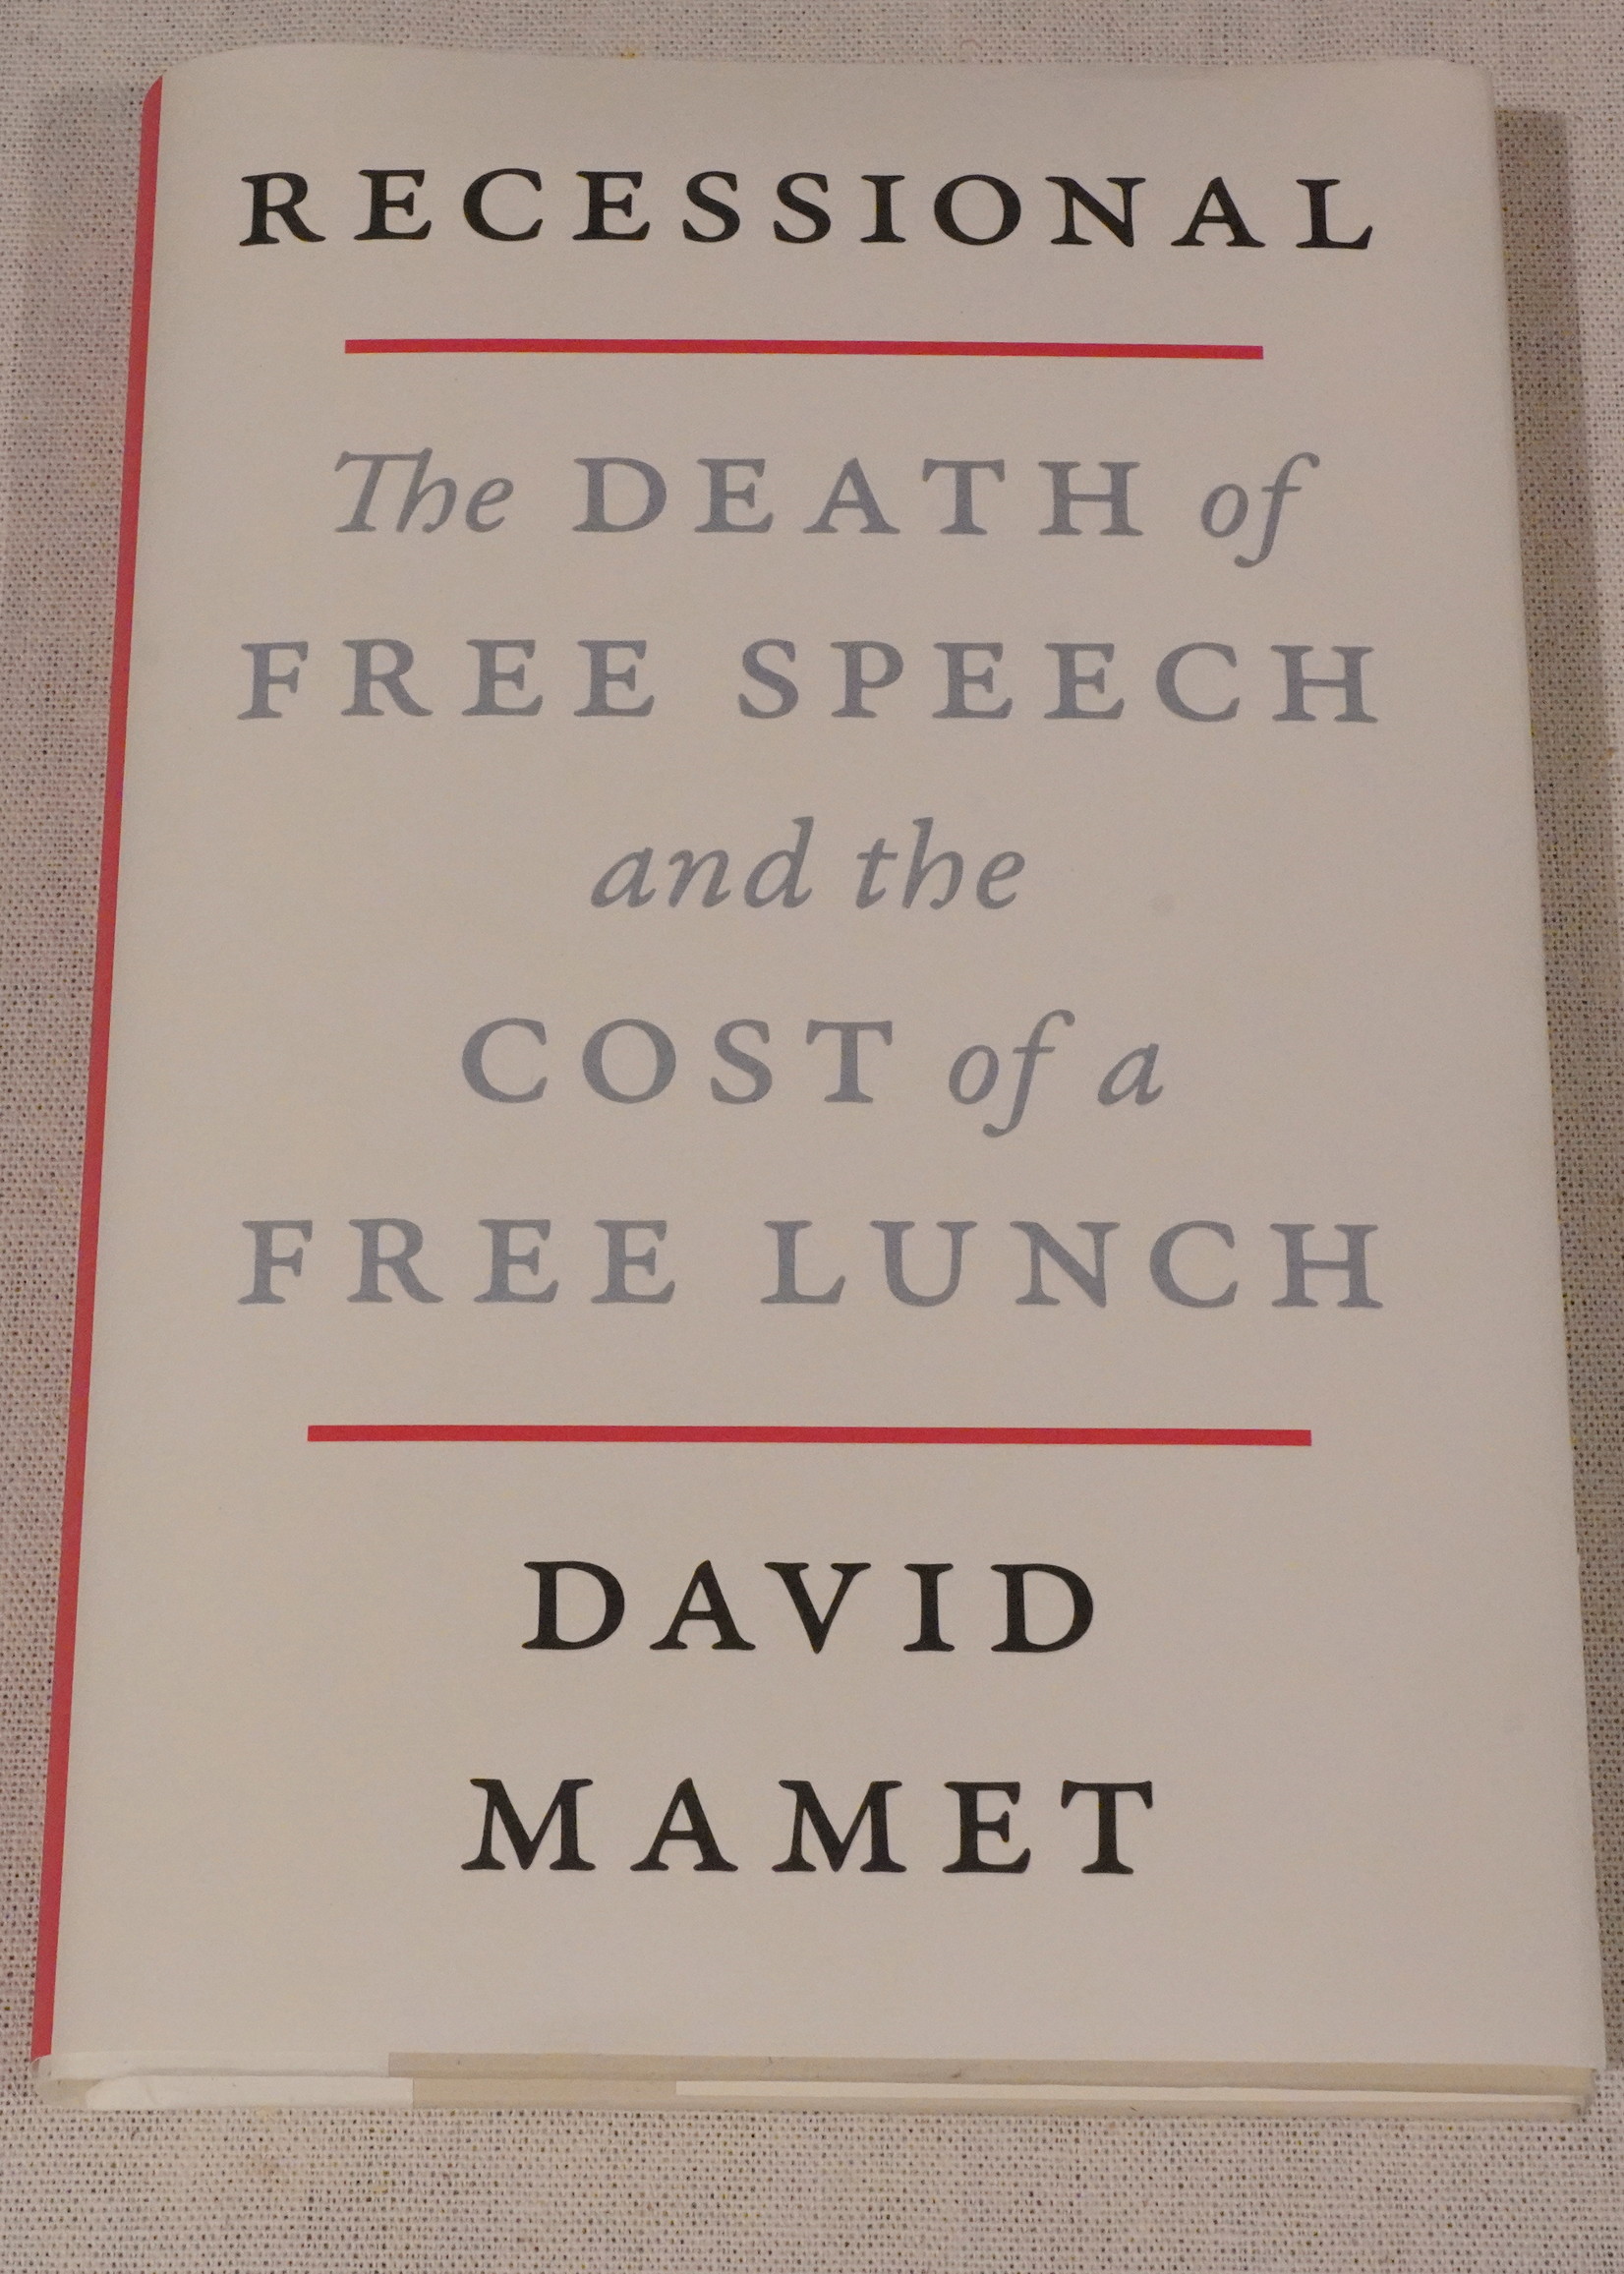 Broadside Books Recessional - The Death of Free Speech and the Cost of a Free Lunch